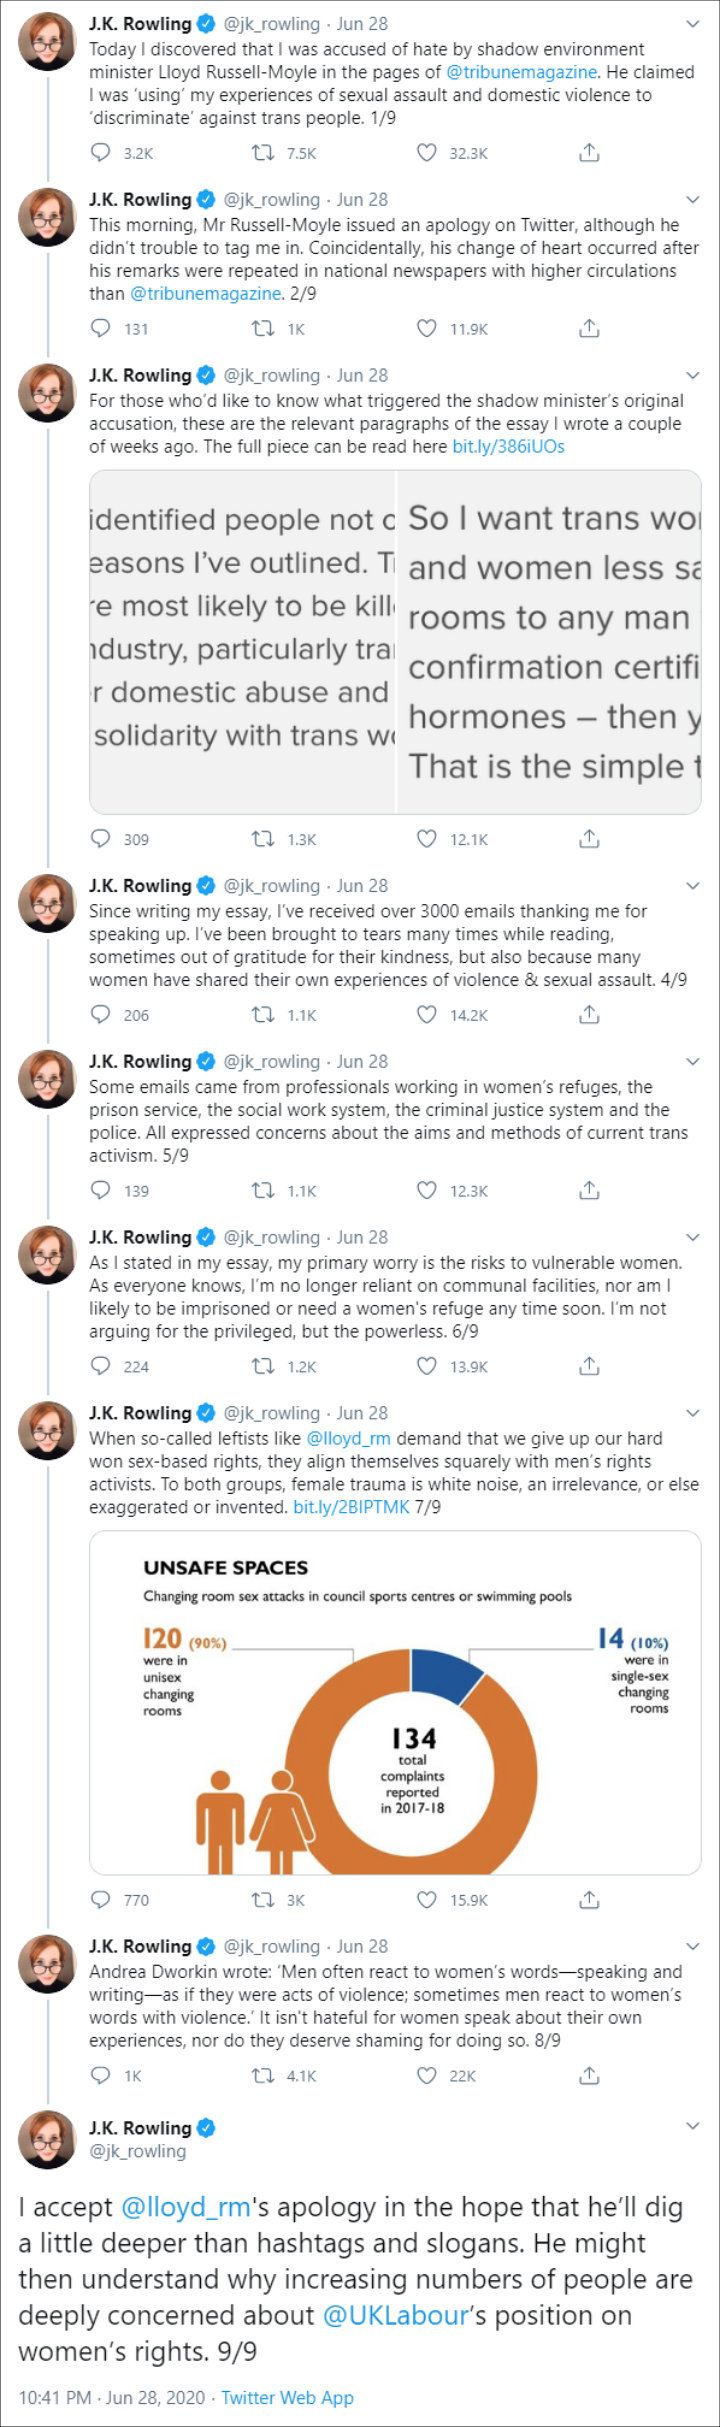 J.K. Rowling addressed Lloyd Russell-Moyle's apology